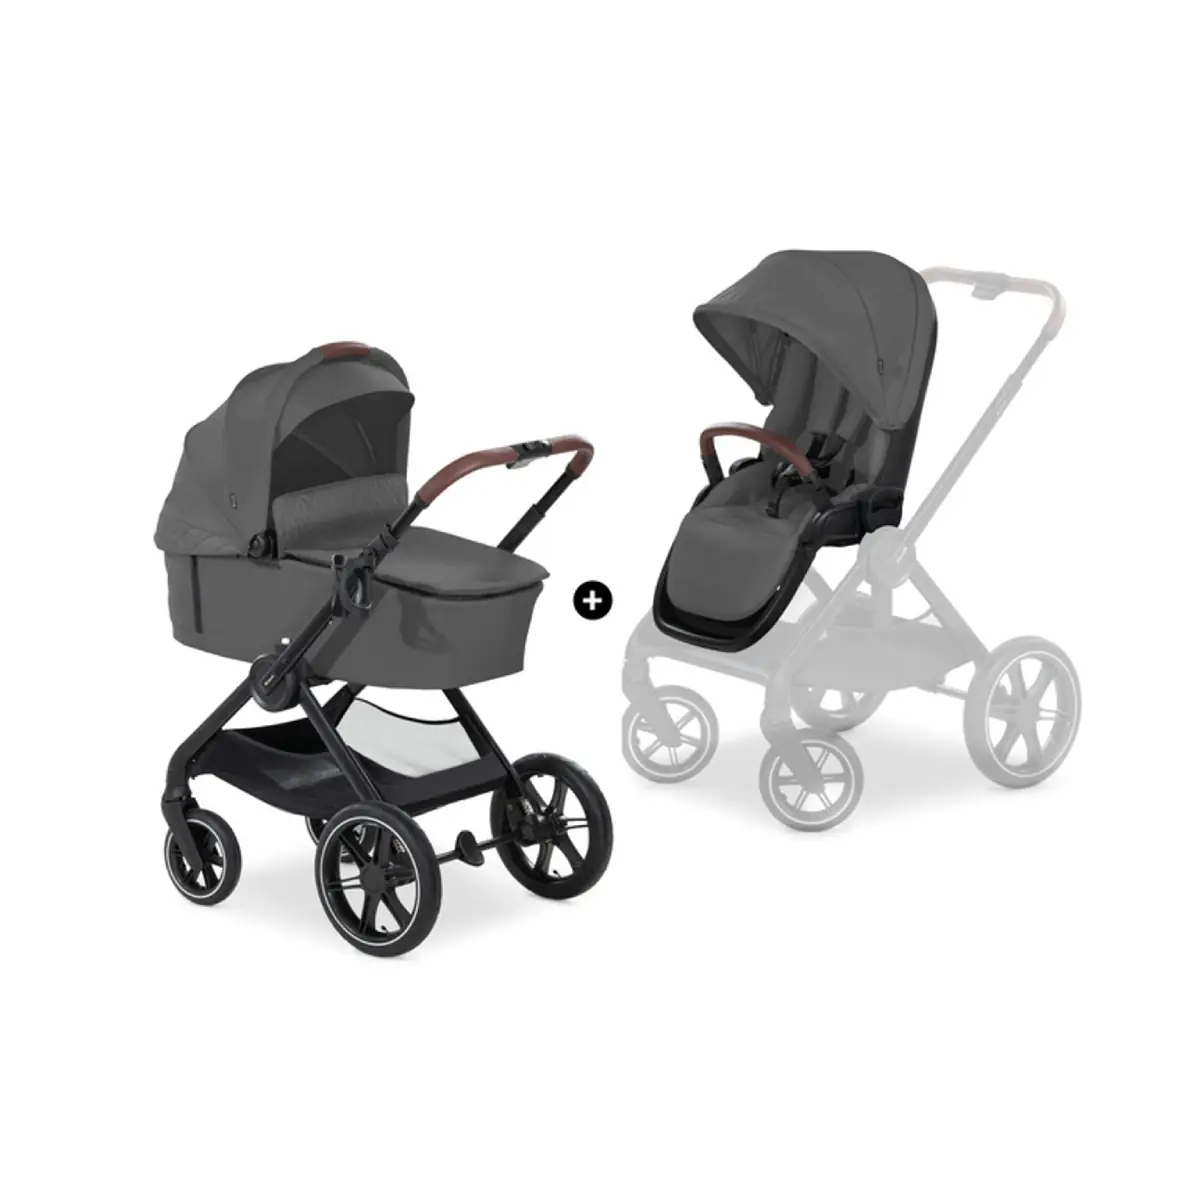 Image of Hauck Walk N Care All in One Set-Dark Grey (New)